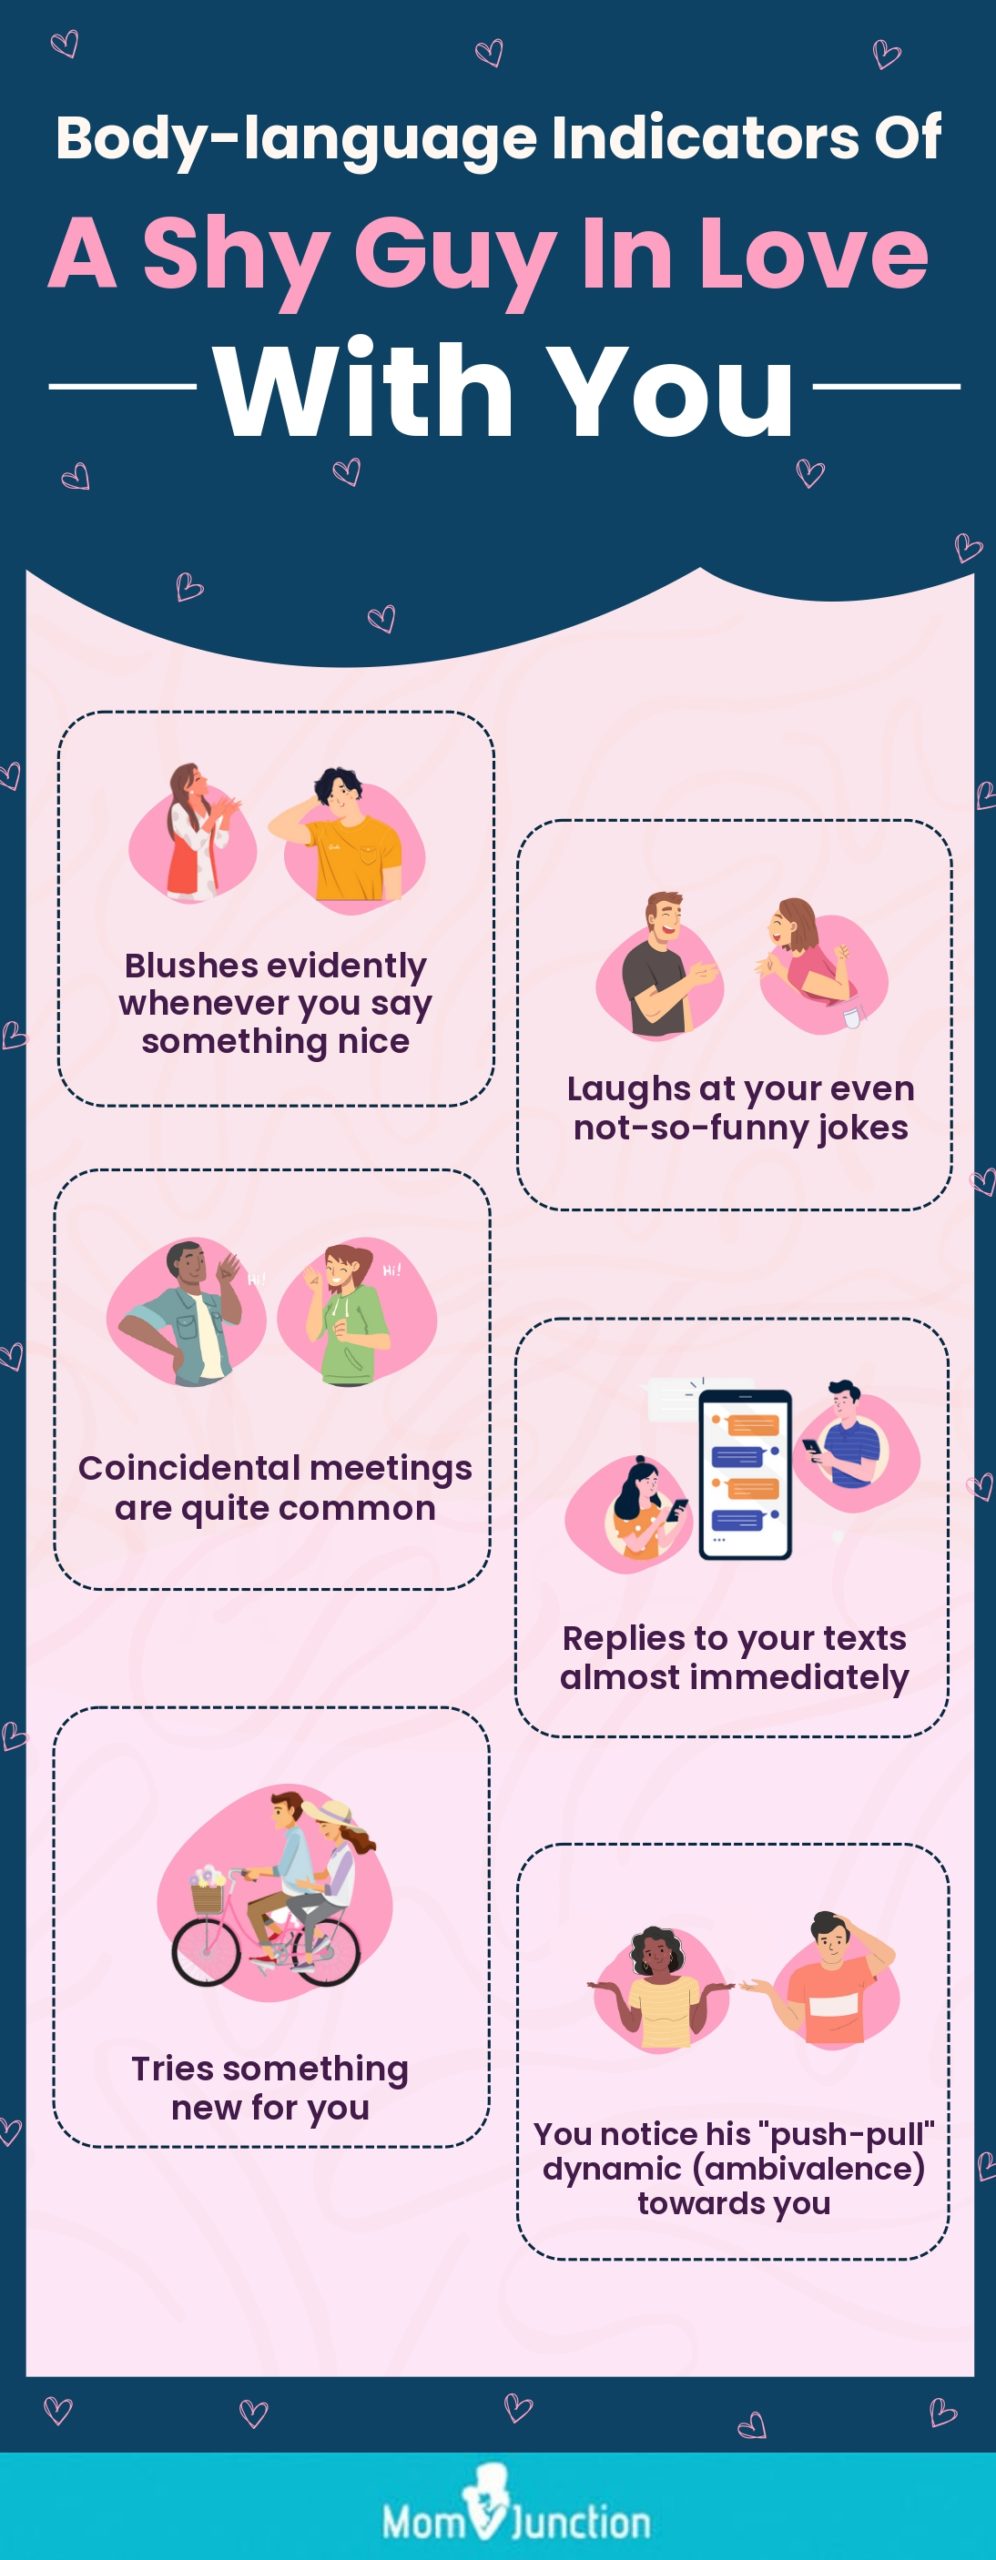 signs to tell you that a shy guy likes you [infographic]